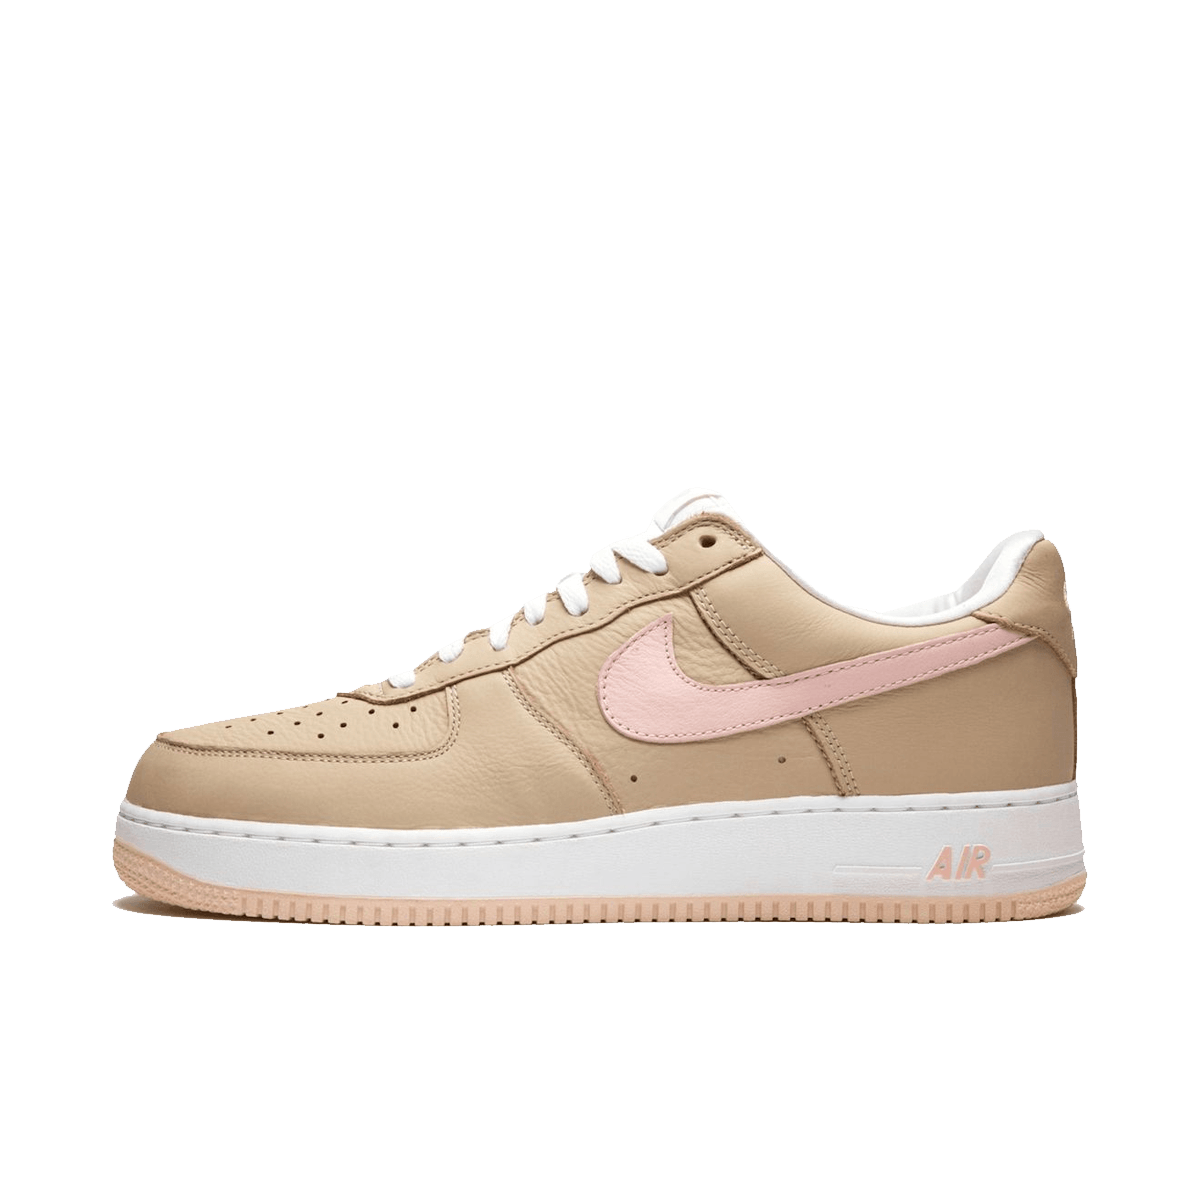 Kith x Nike Air Force 1 Low Retro 'Linen'